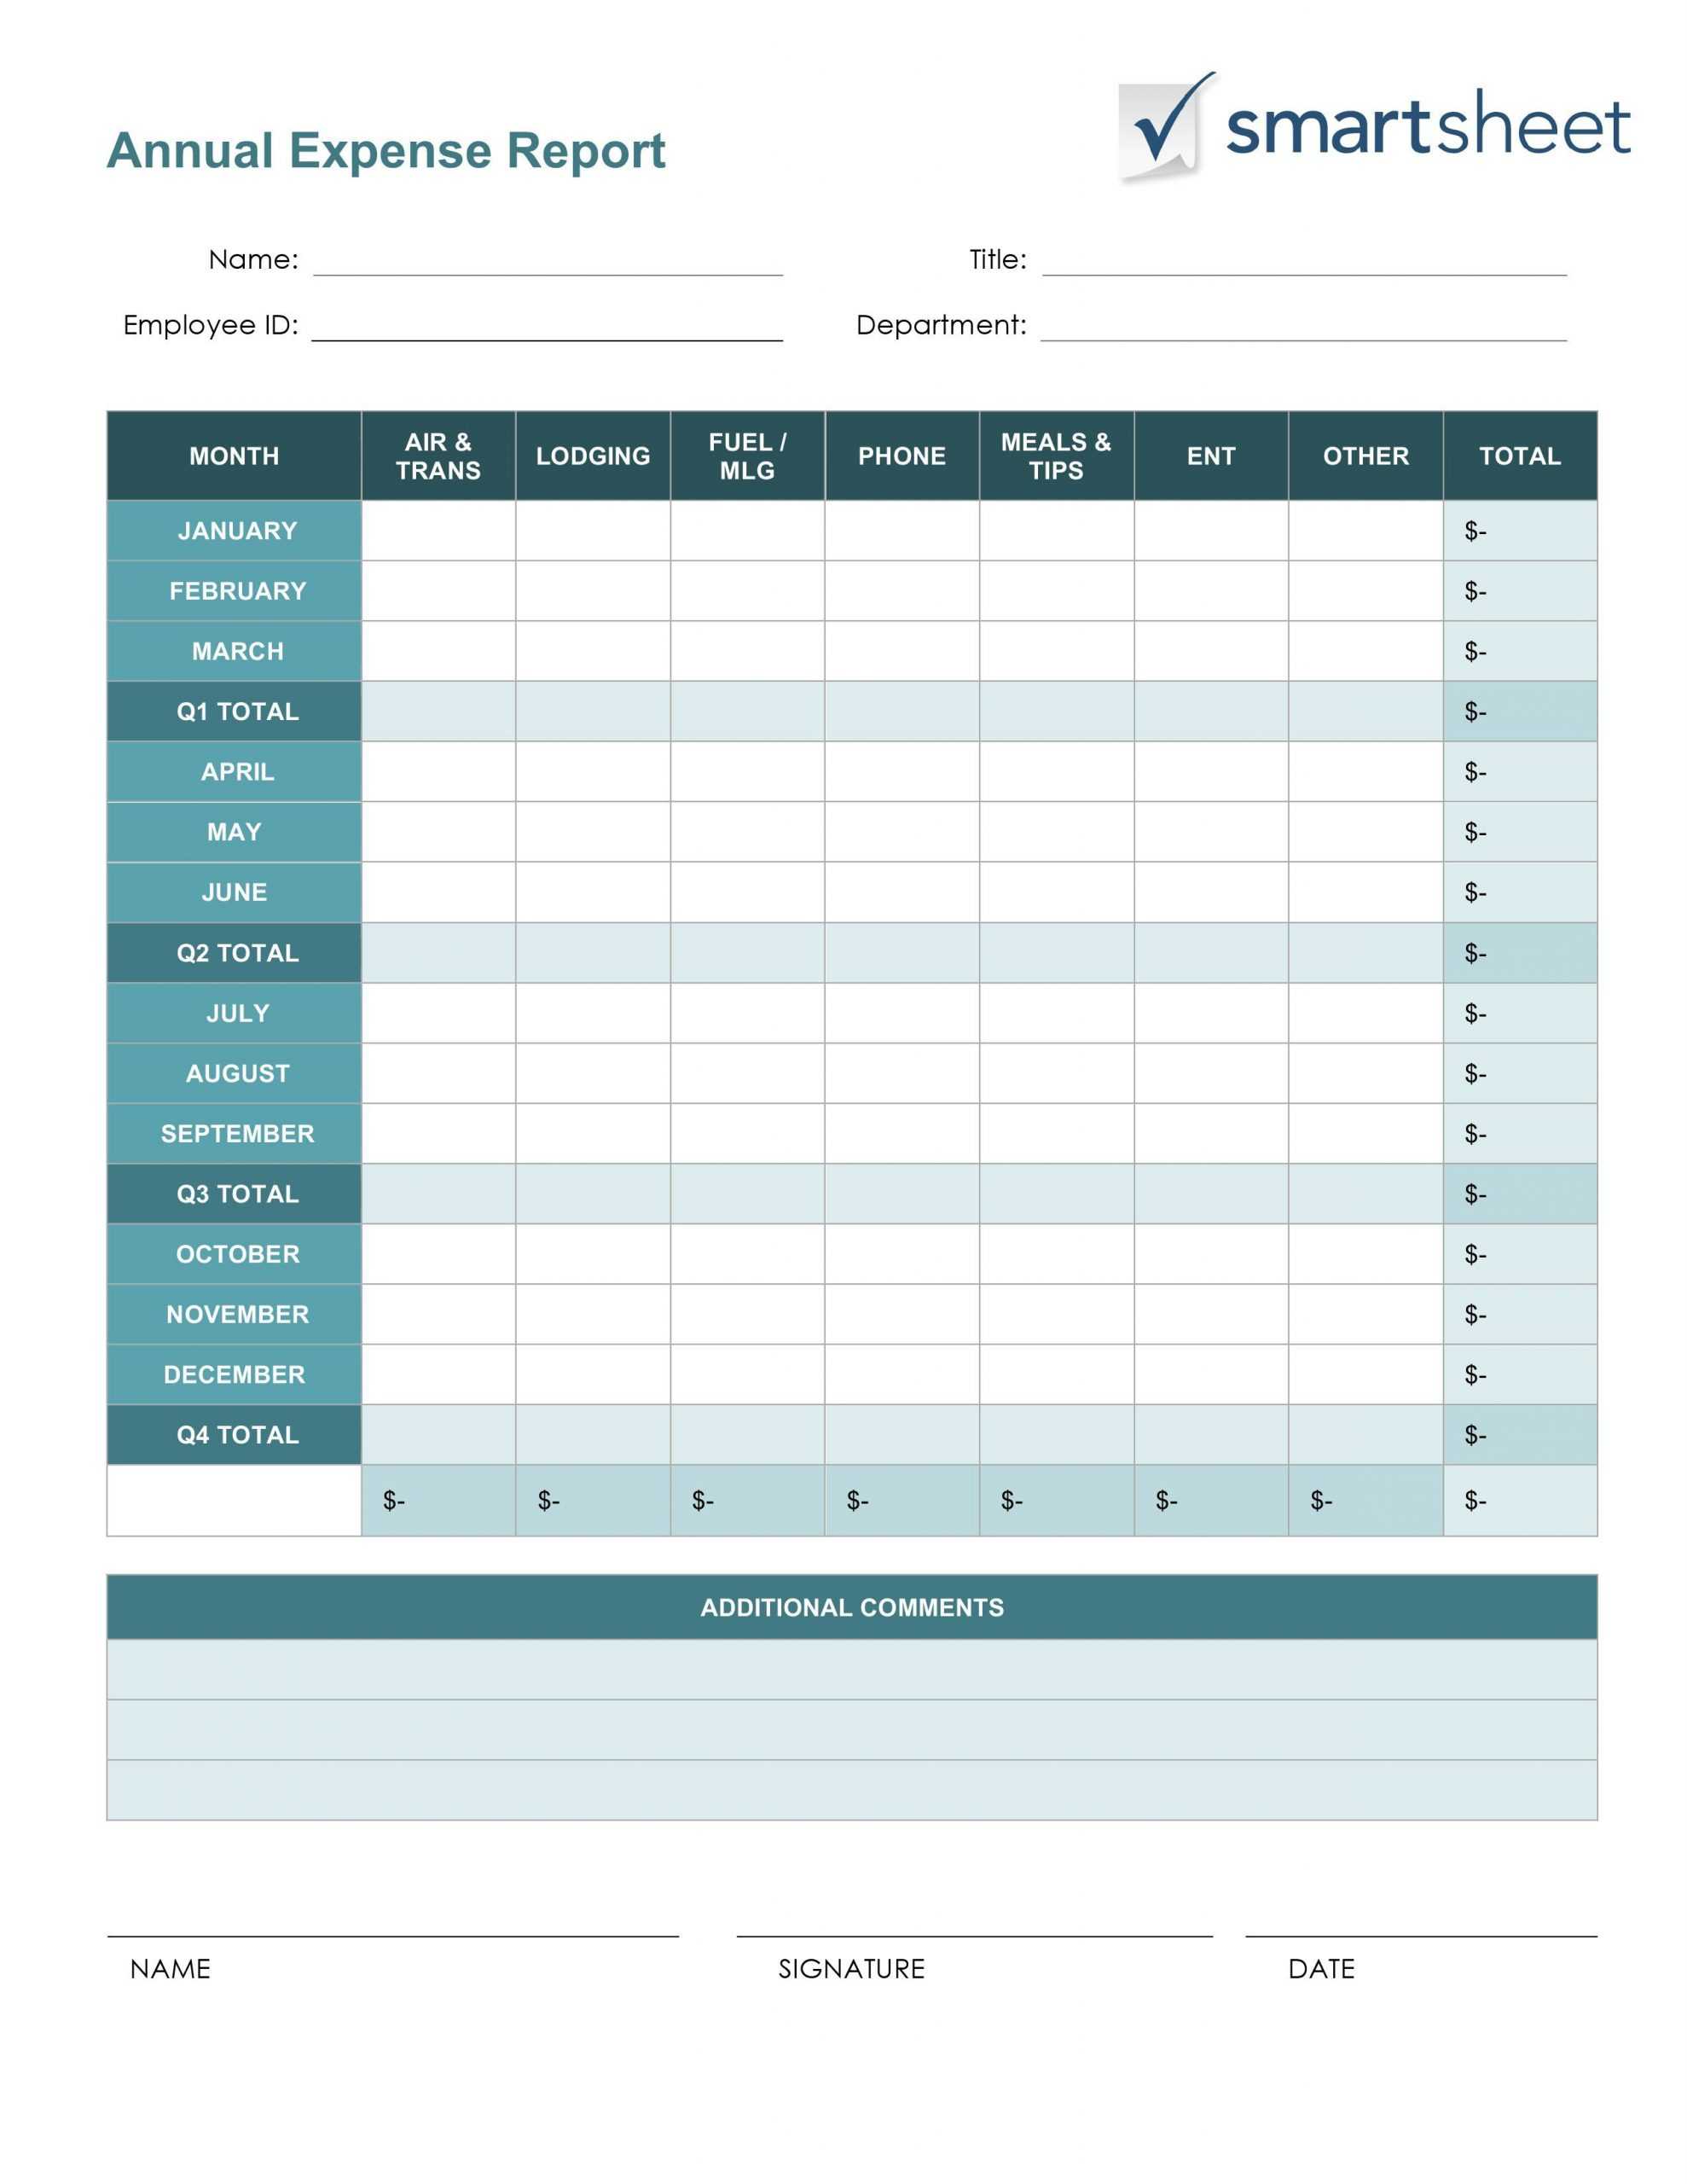 Yearly Expenses Spreadsheet Annual Business Expense Template With Regard To Company Expense Report Template